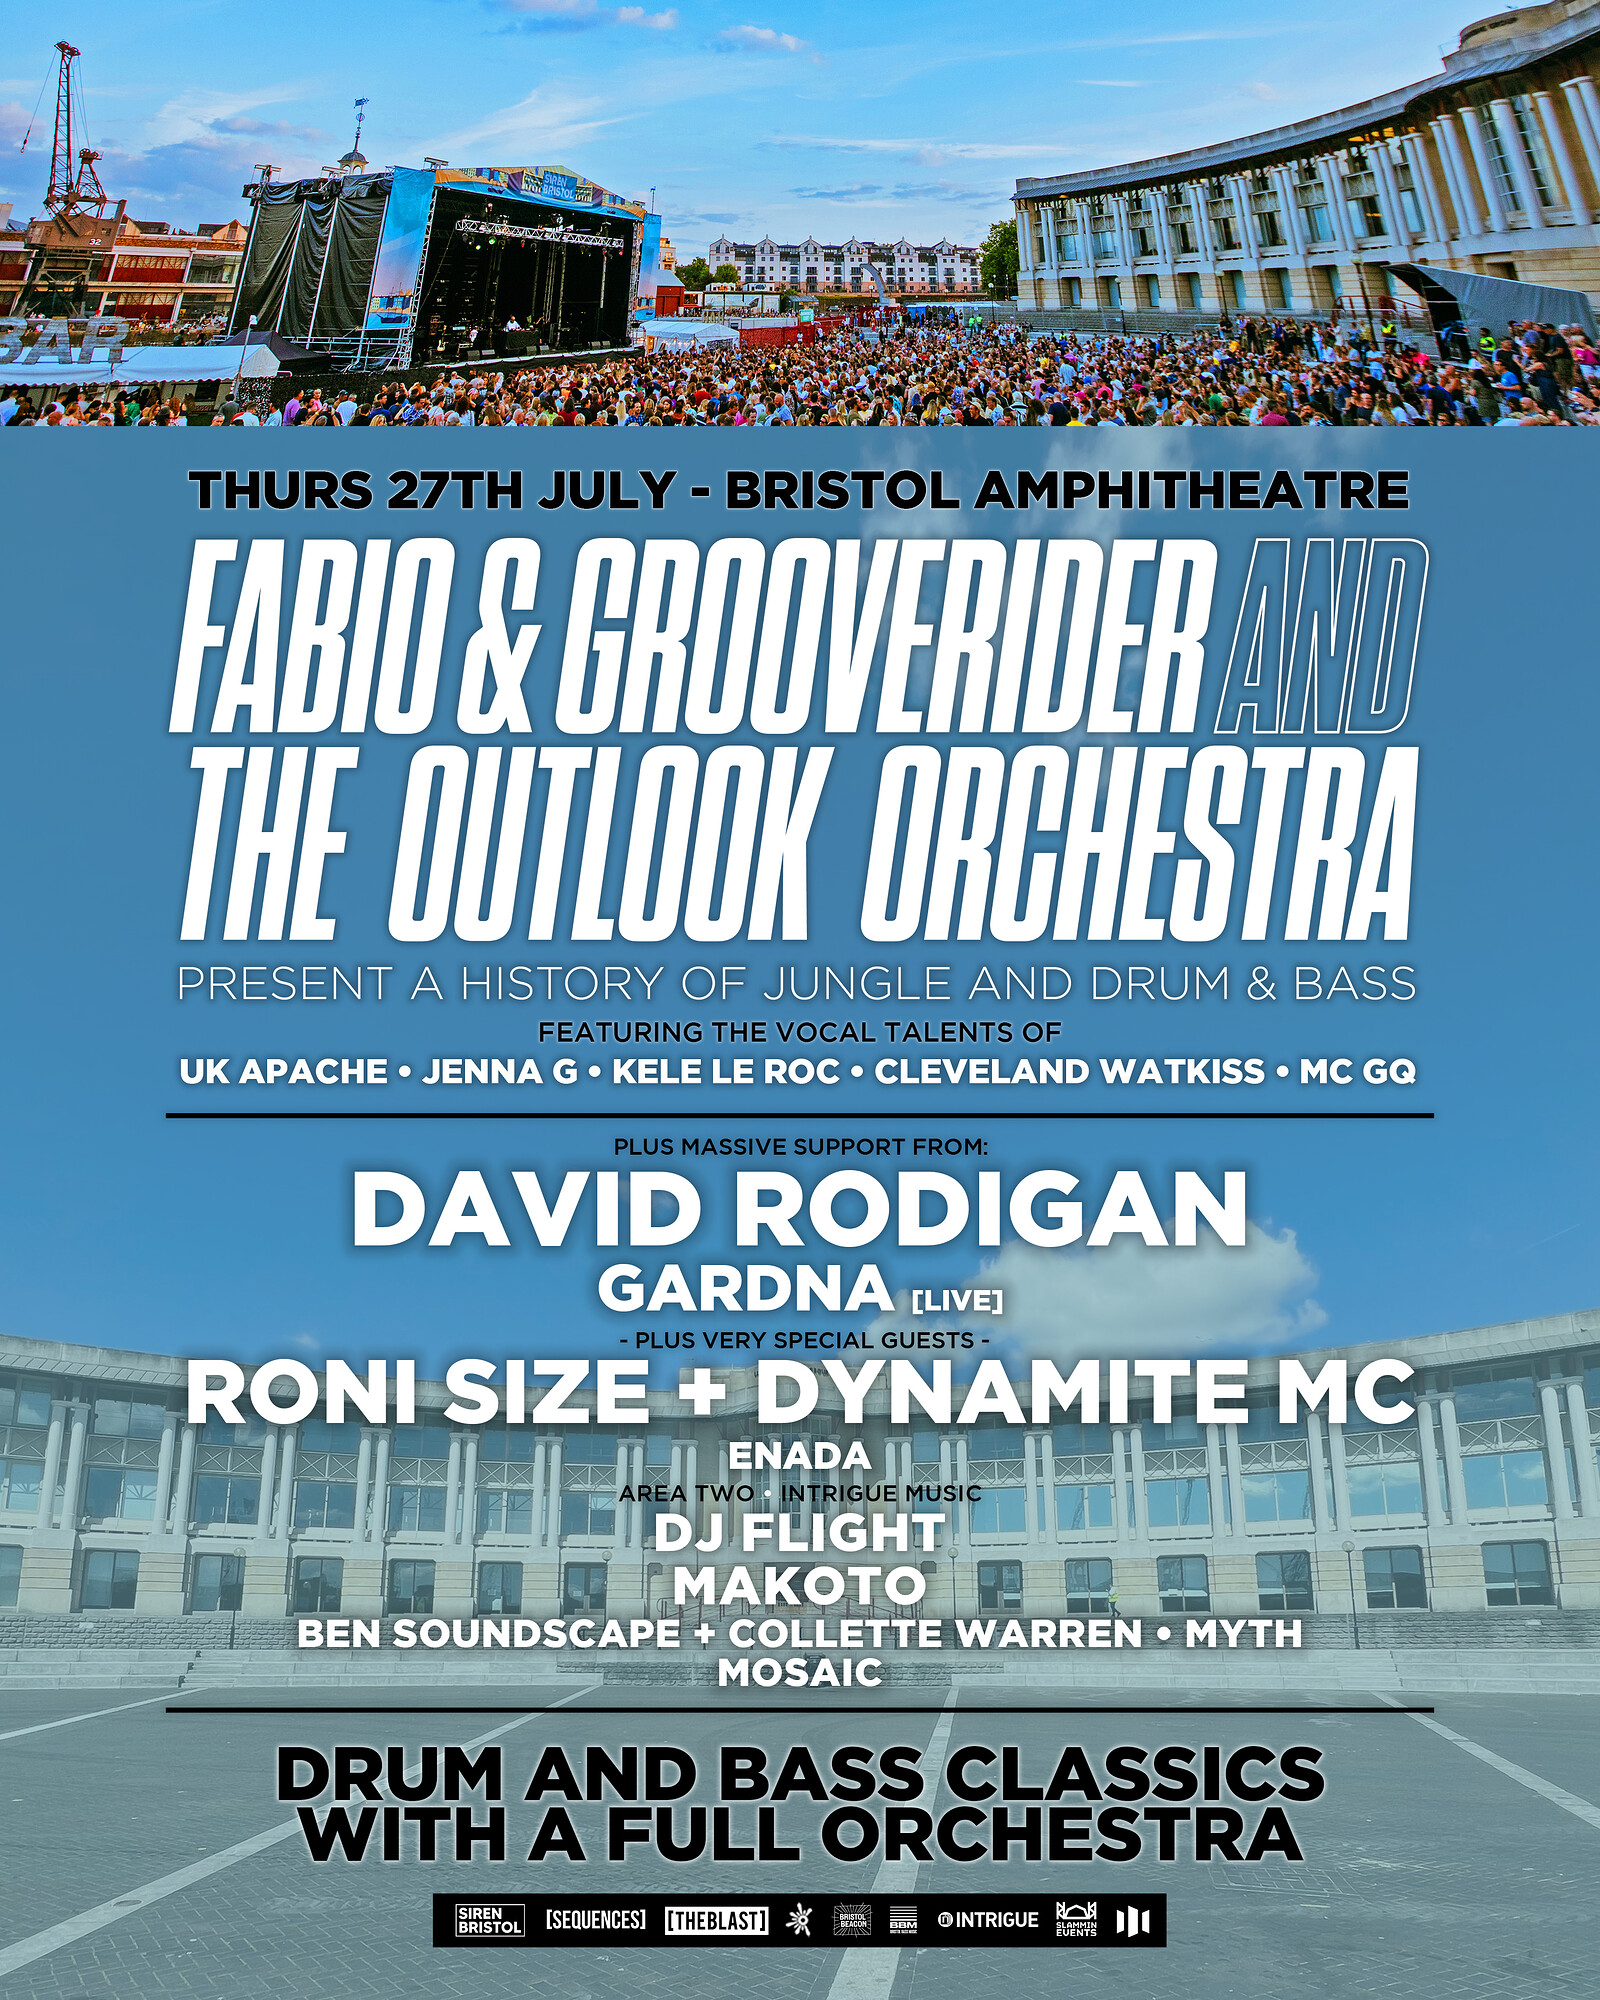 Fabio  Grooverider and The Outlook Orchestra tickets — £32.15 Lloyds  Amphitheatre, Bristol